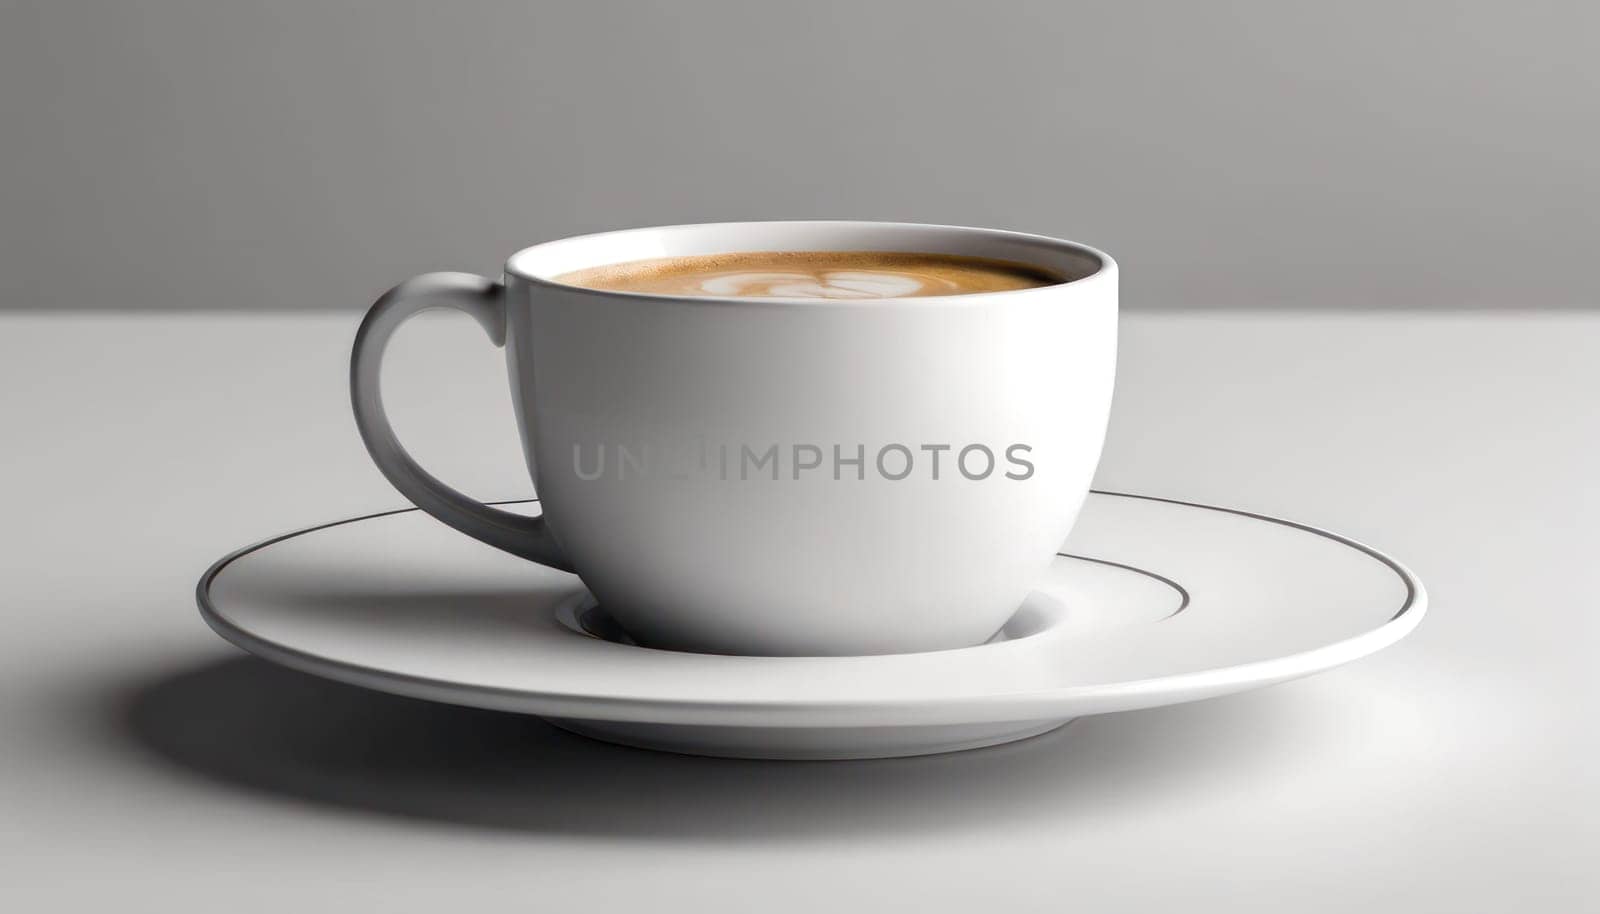 A hot cup of coffee on a saucer, set against a white background, casting a subtle shadow